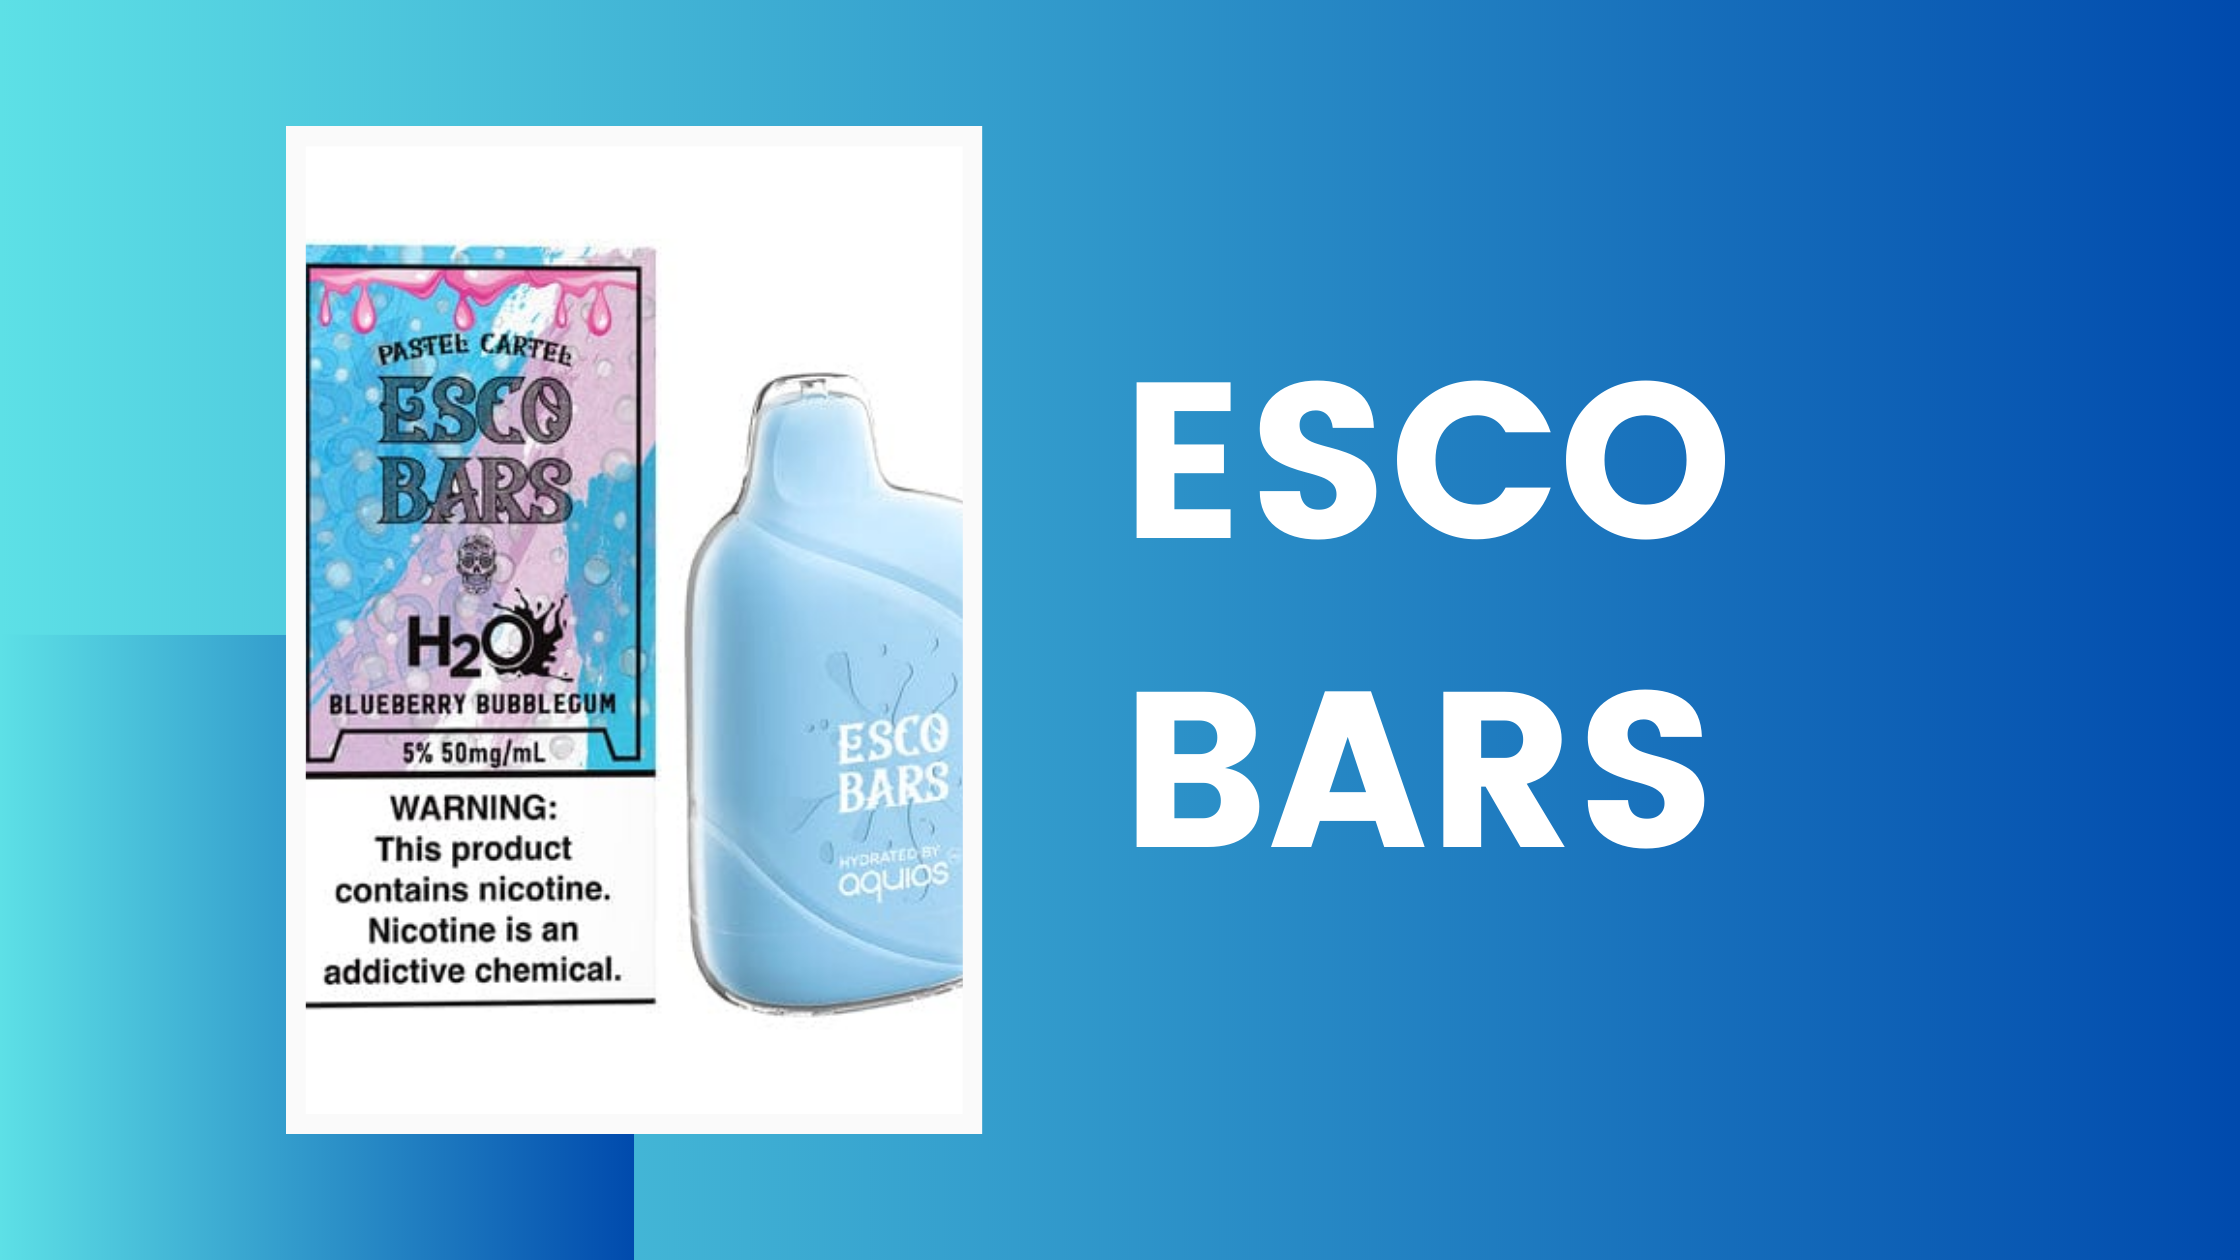 Take The Vaping League With The Best Esco Bar Flavors